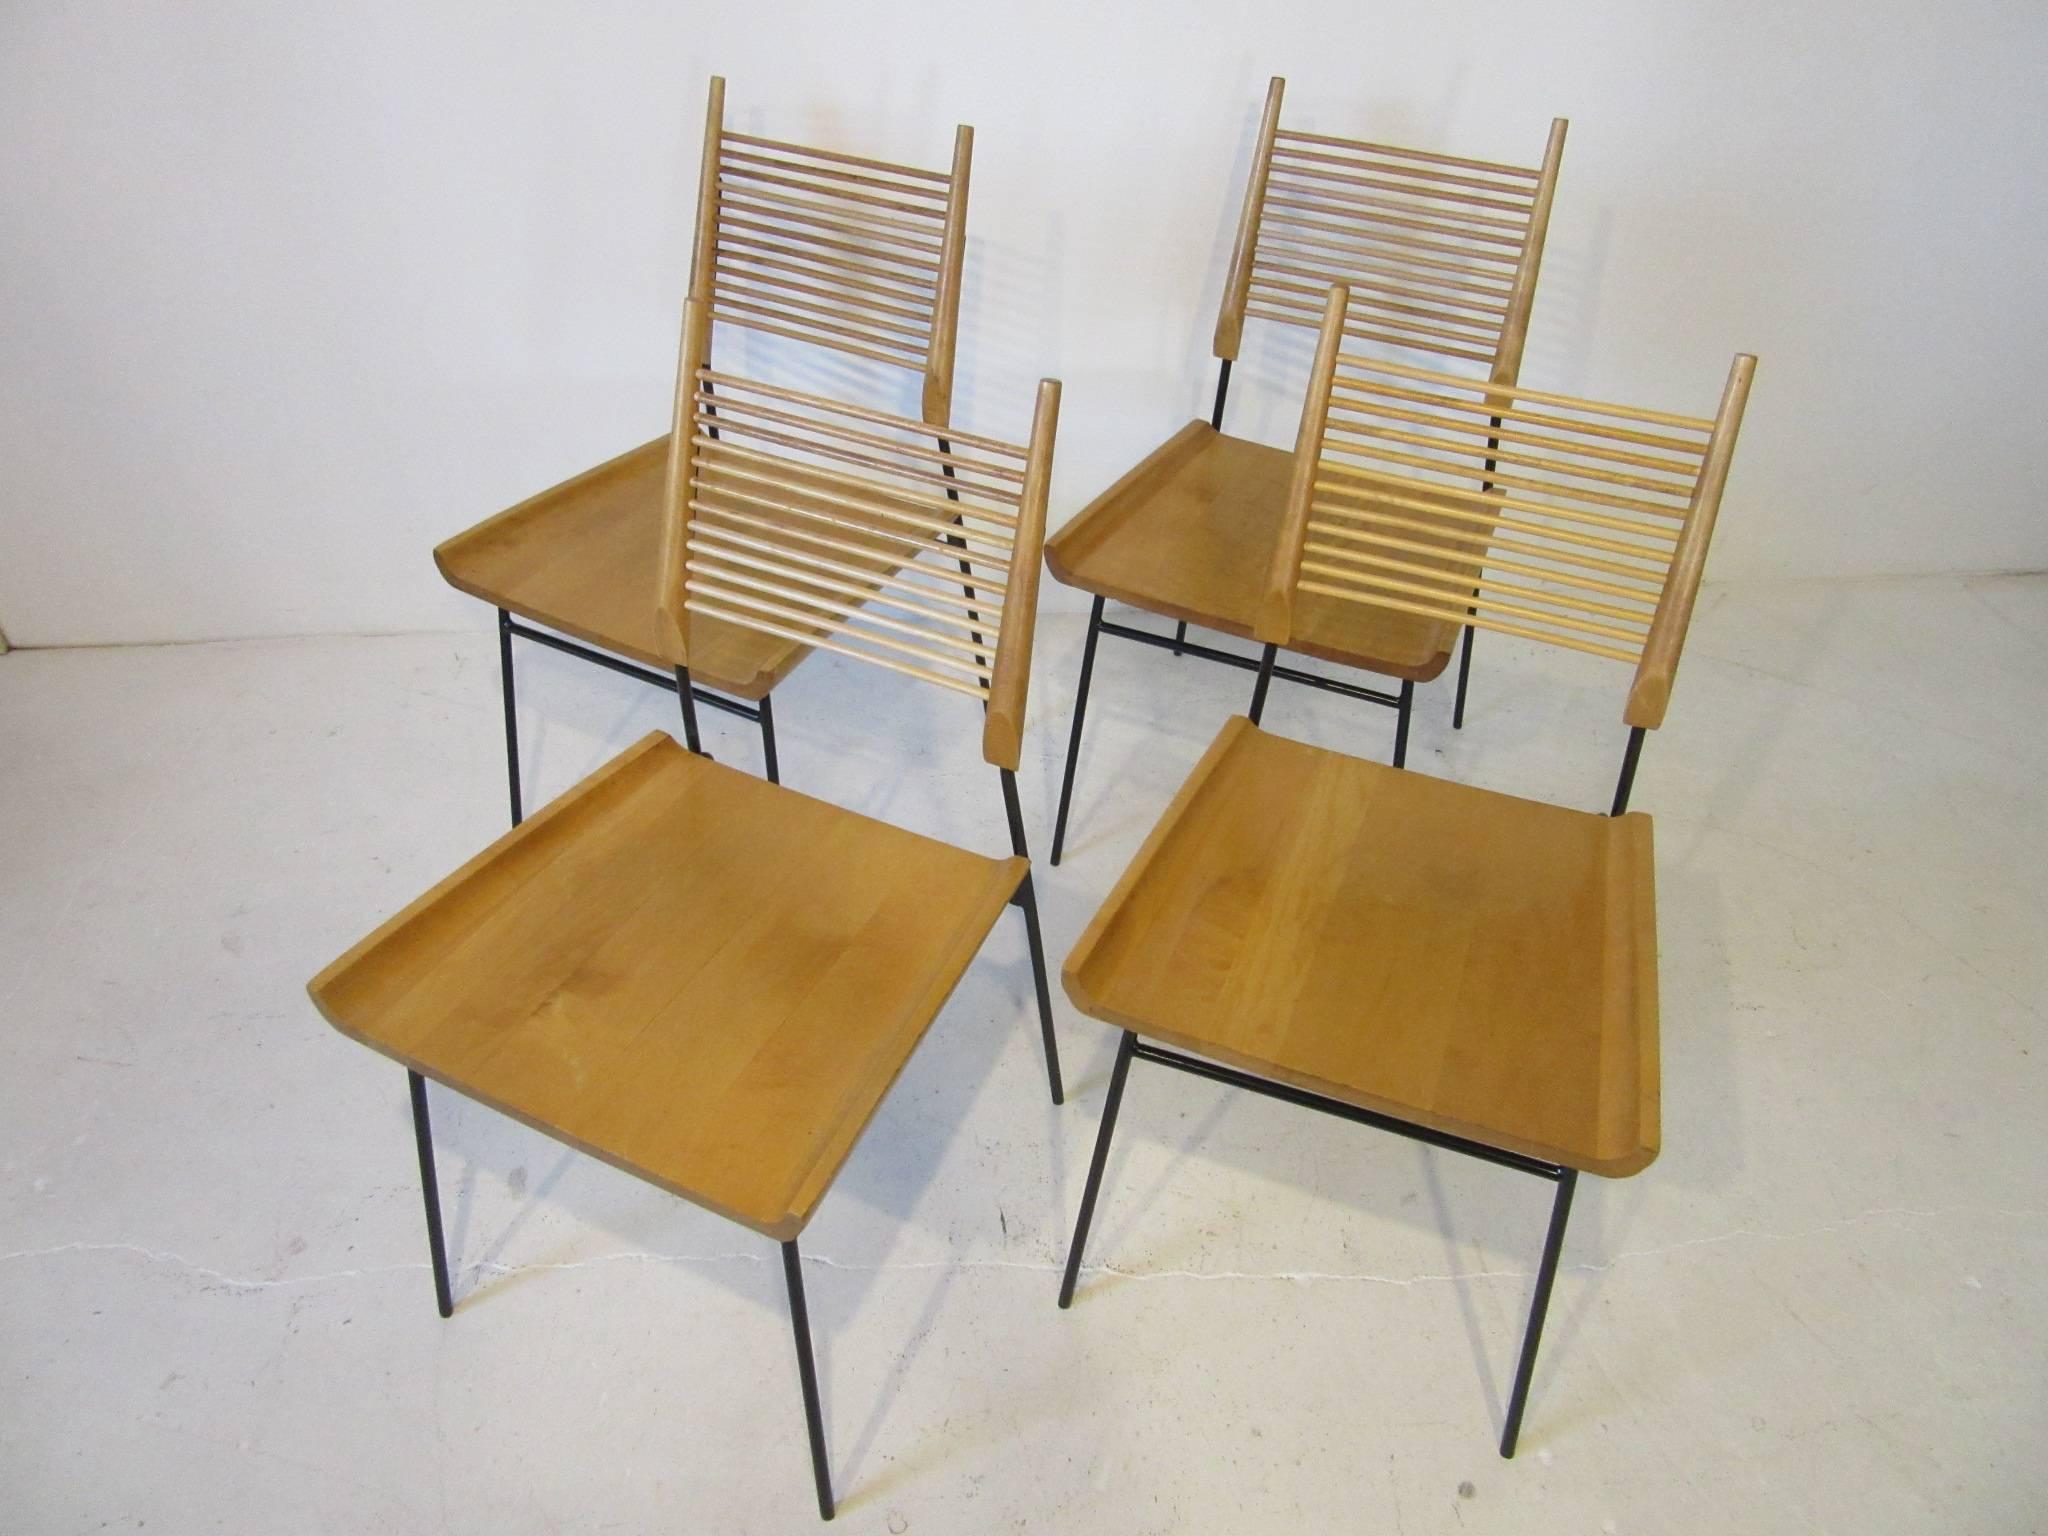 A set of four solid maple shovel seat or ladder back dining chairs with spindle design to the backrest , wood seat and satin black wrought iron frame with small rubber feet. Manufactured by the Winchendon Furniture Company from the Planner Group